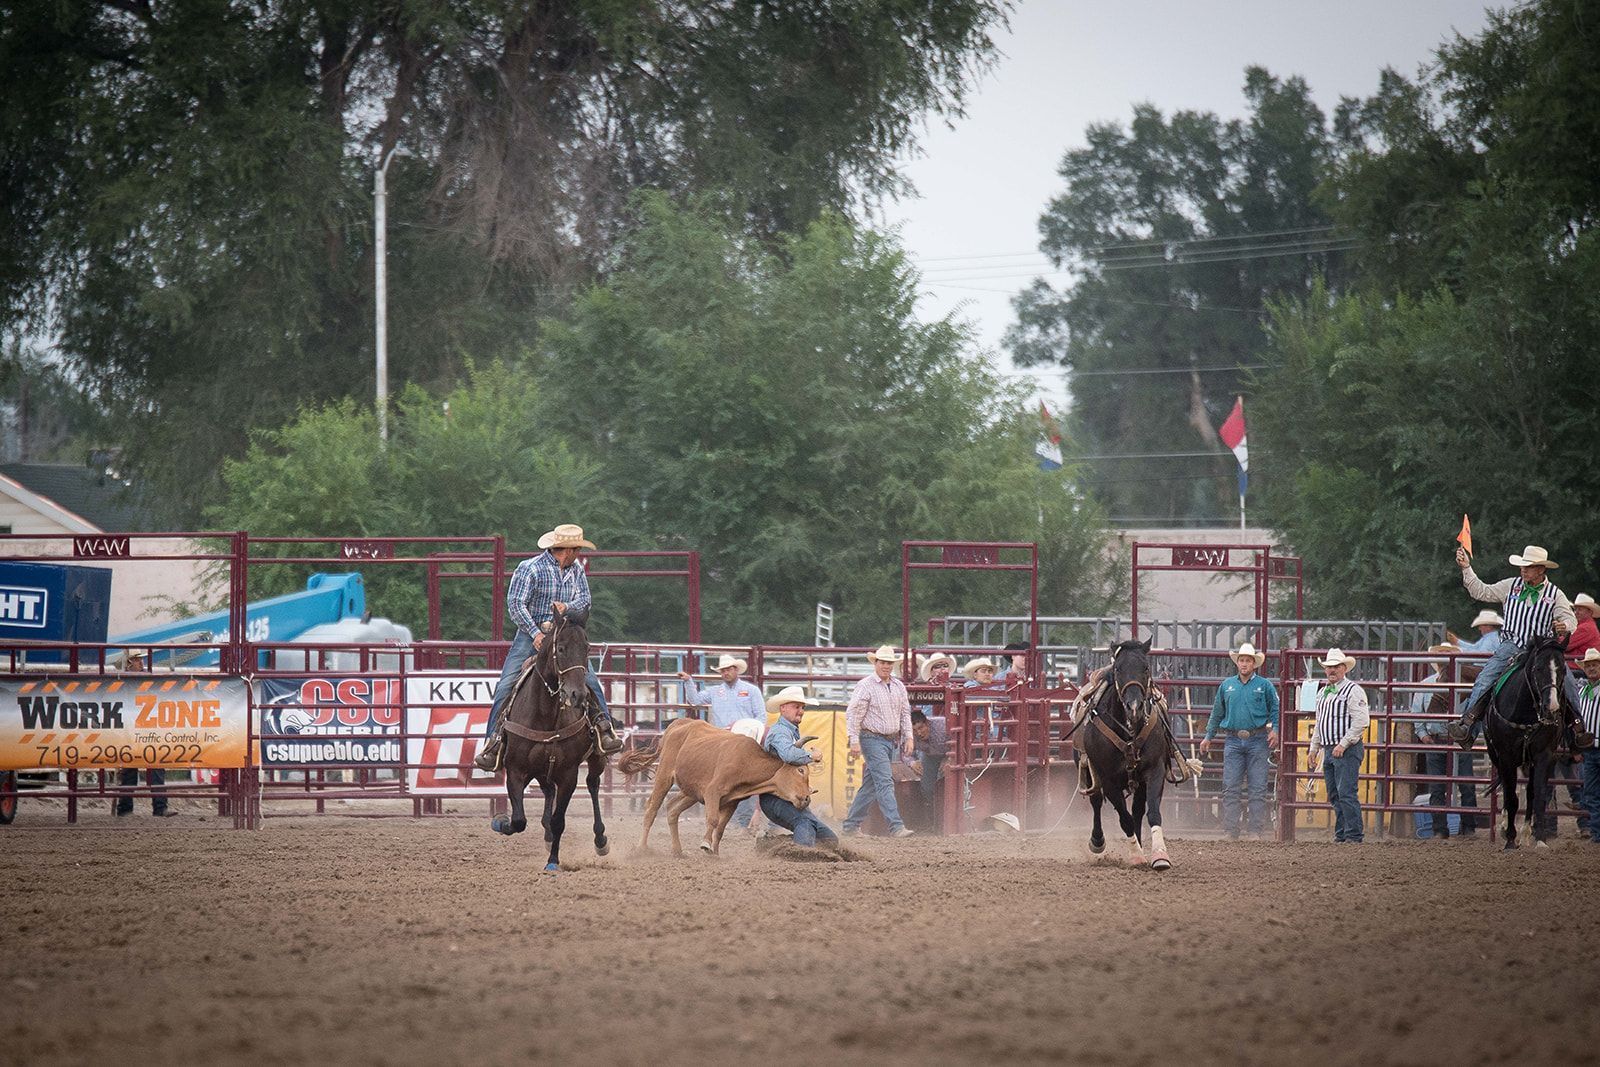 Several cowboys participating in steer wrestling at the Colorado State Fair